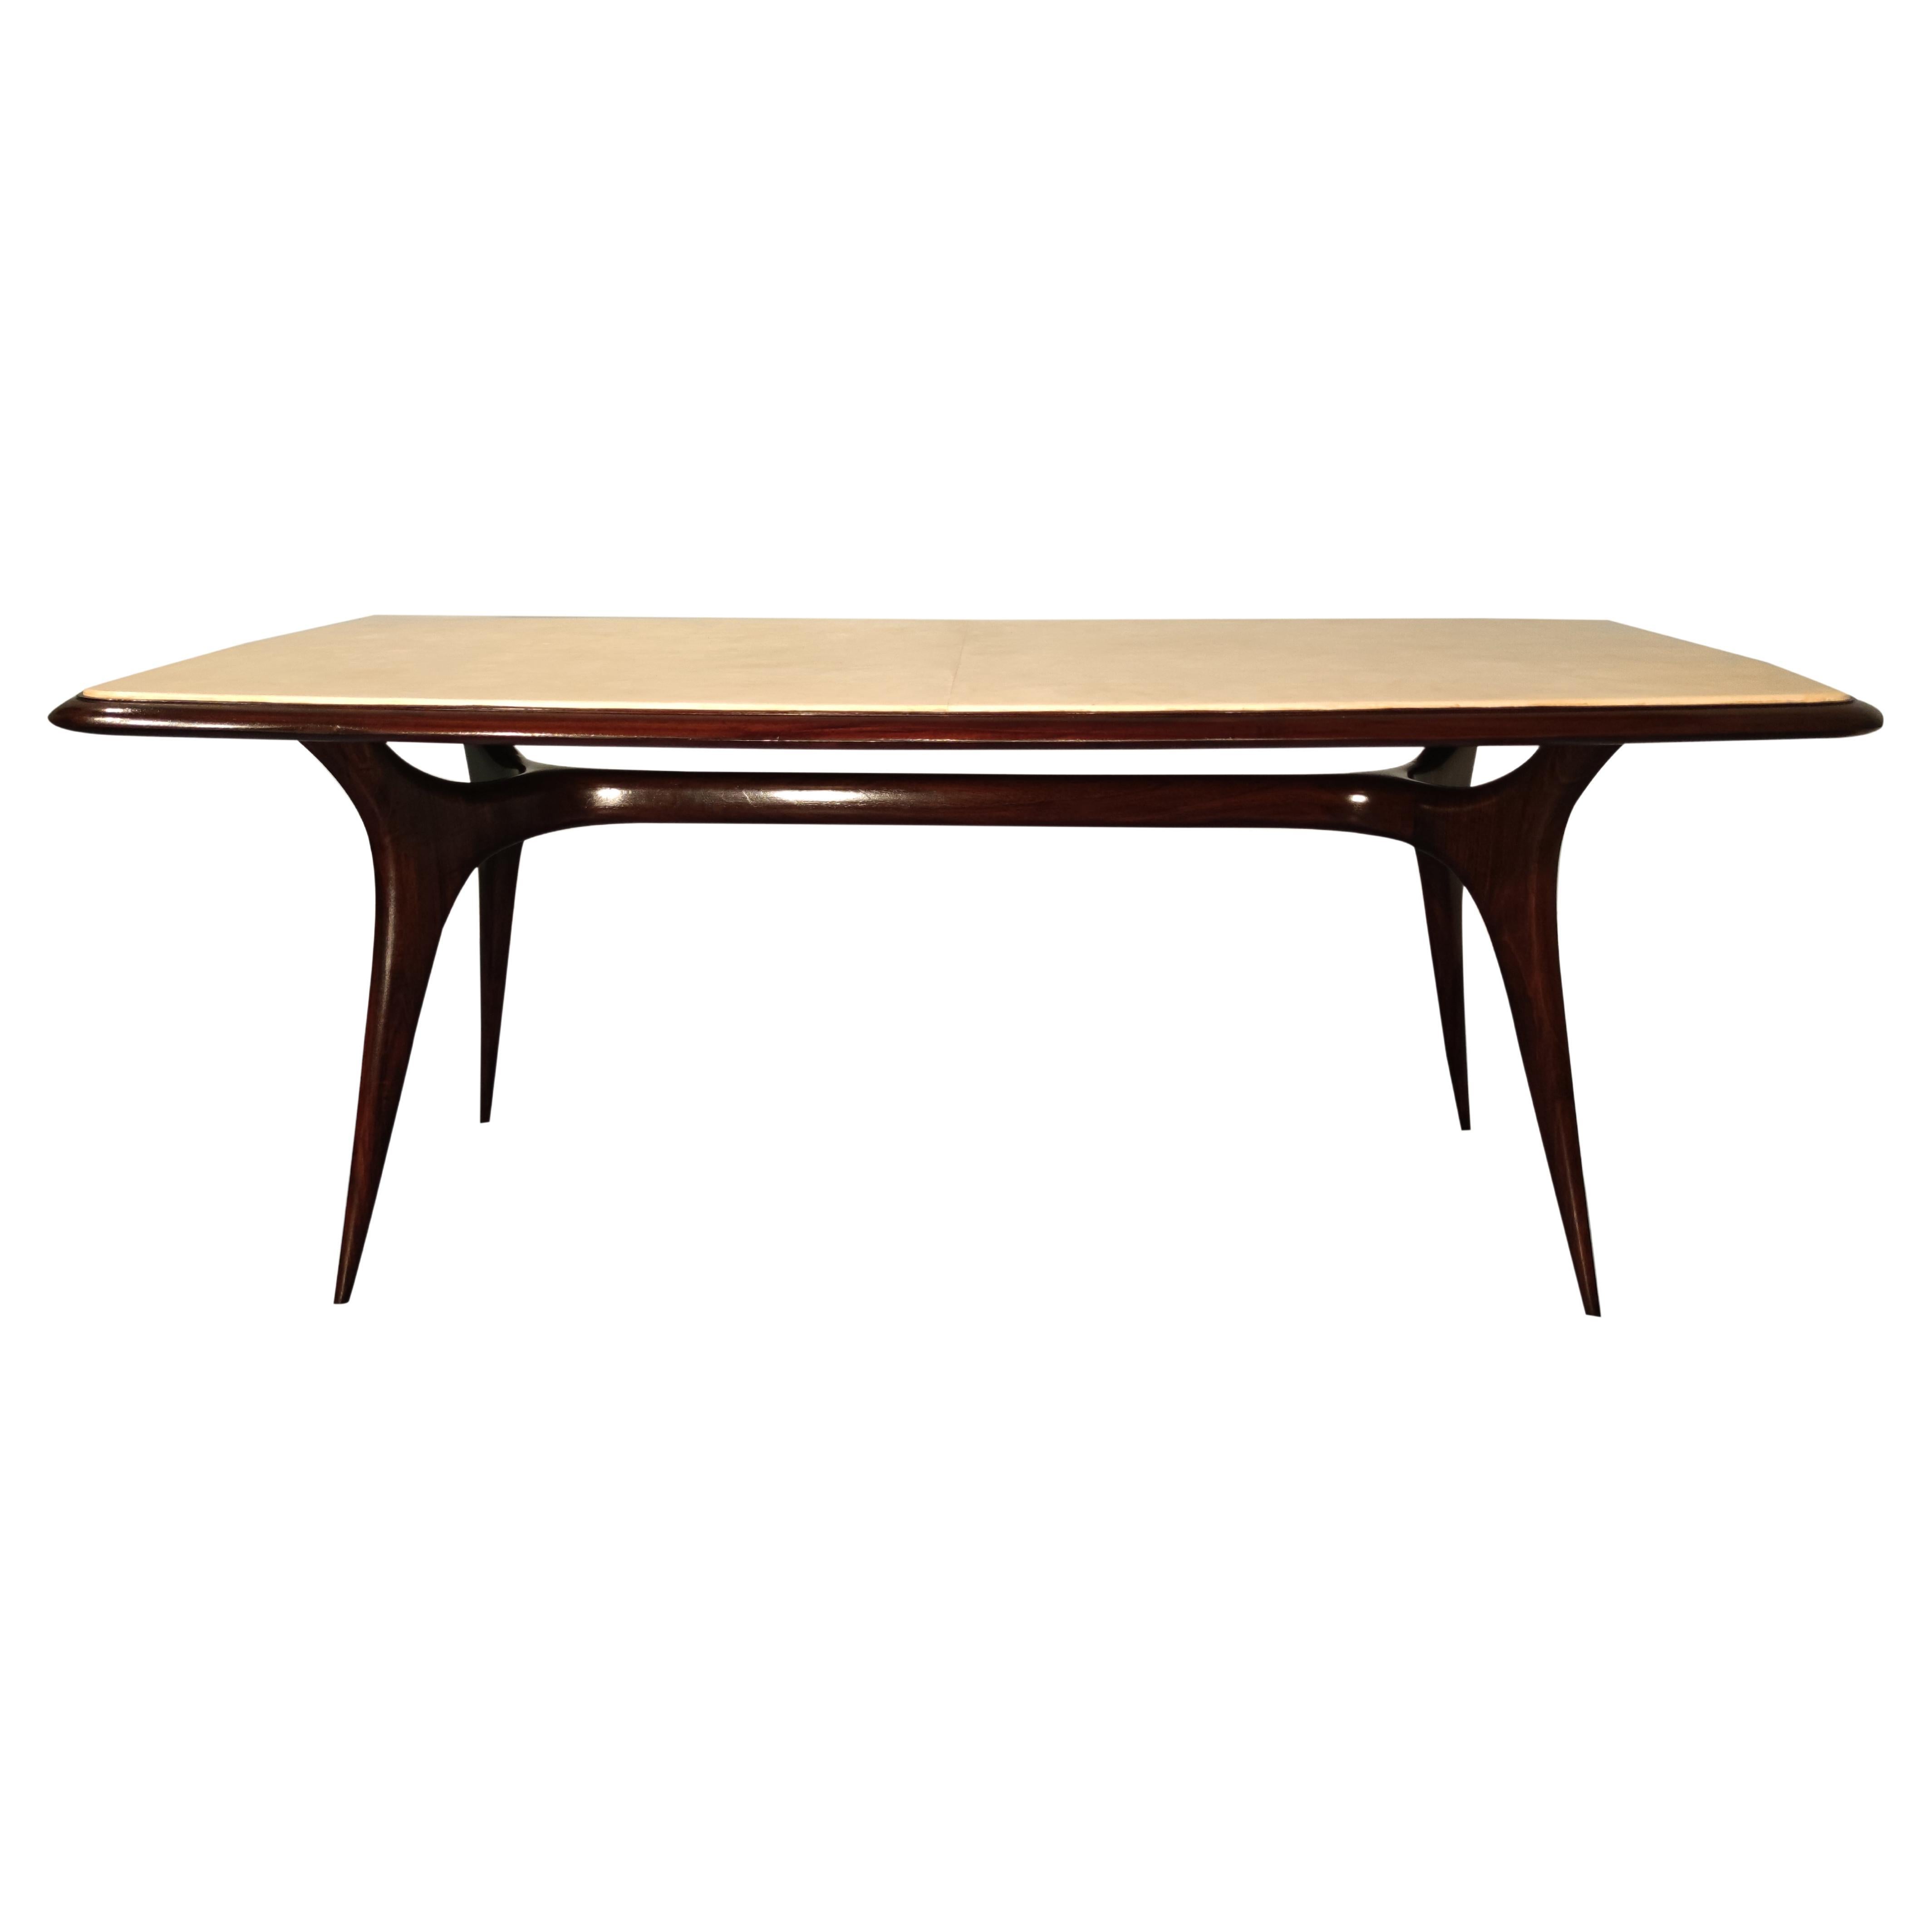 Stylish mid-century dining table attributed to Guglielmo Ulrich, from the 1950s. The top is made of precious parchment paper. The legs line in walnut is a splendid example of the 1950s Italian design. This dining parchment table is in good